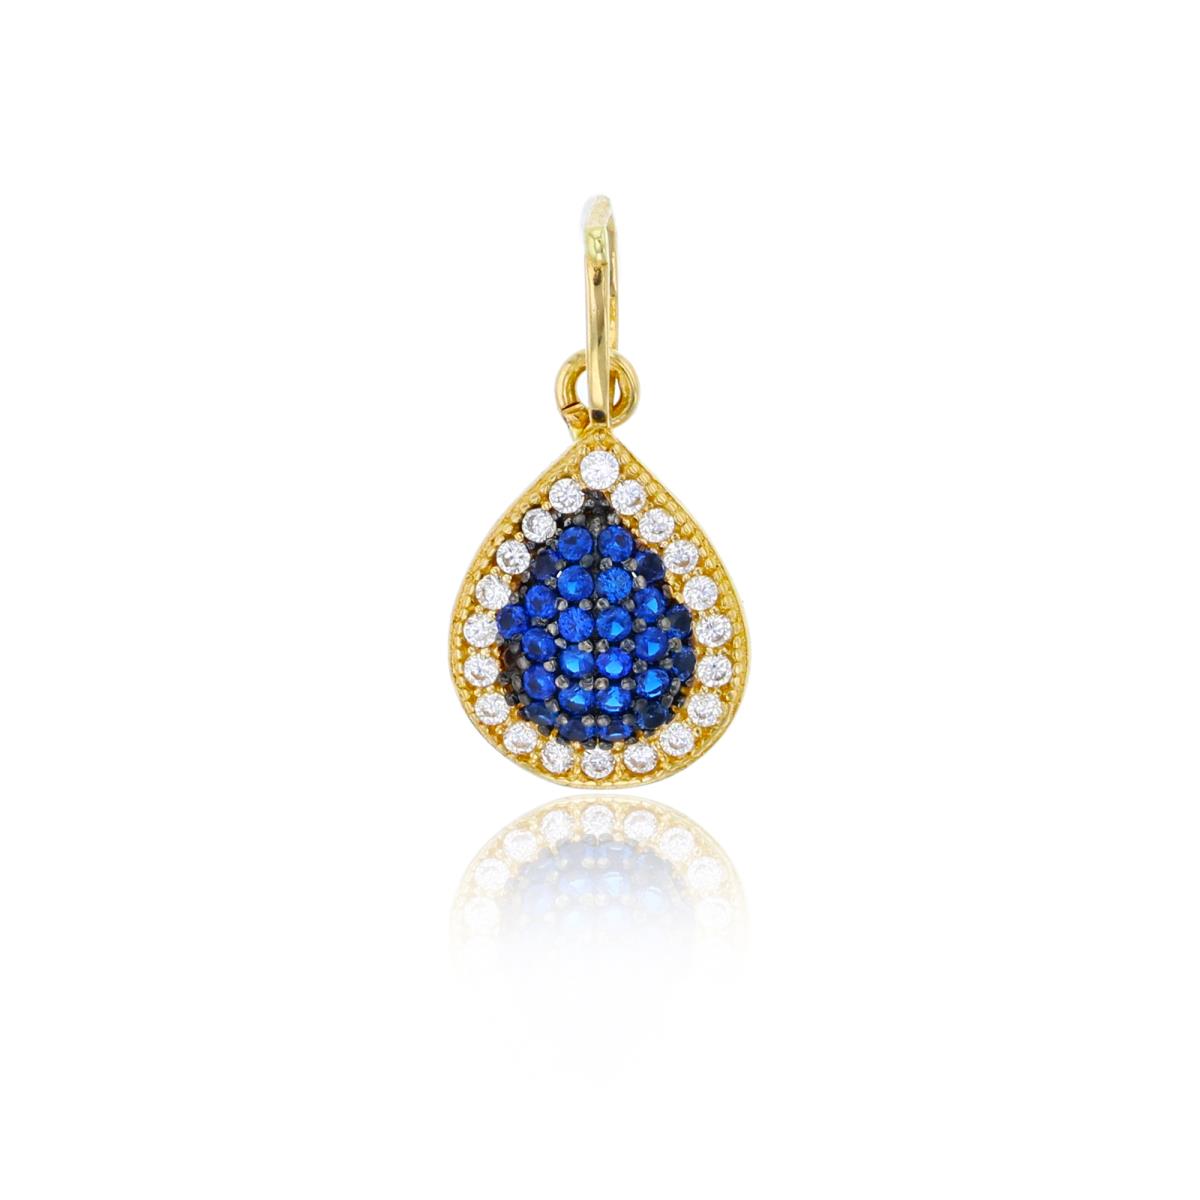 14K Yellow Gold 17x9mm Micropave Sapphire & White CZ Domed Pear-Shaped Pendant